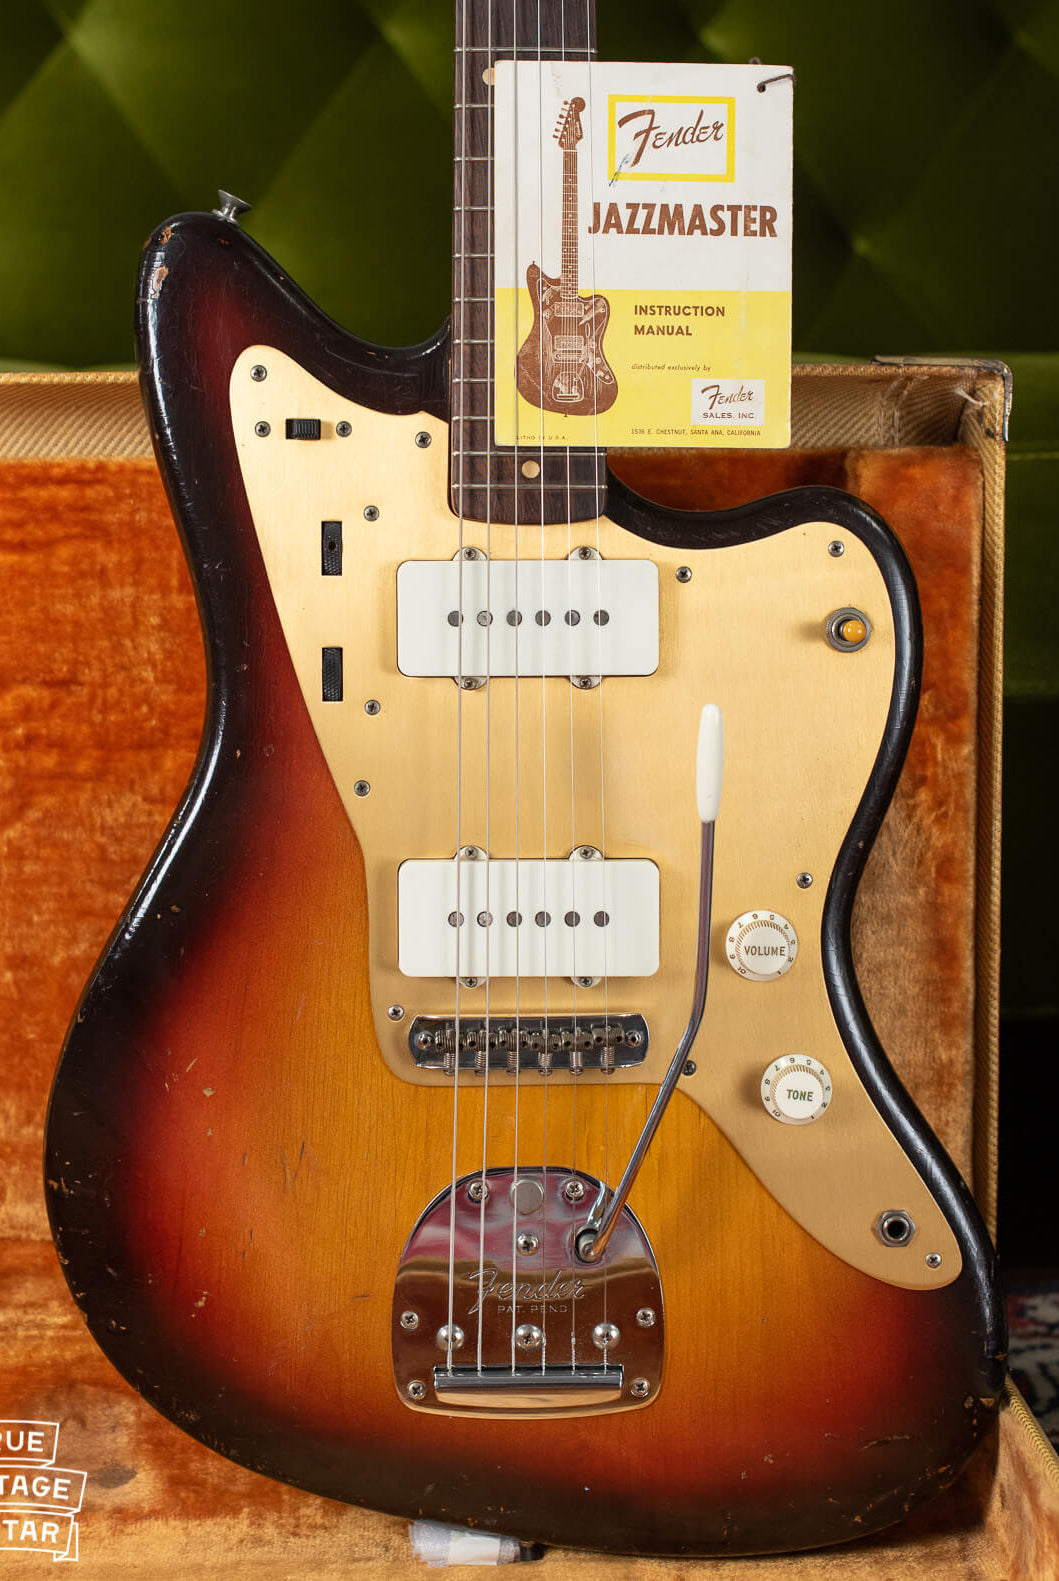 1958 Fender Jazzmaster guitar with gold anodized pickguard